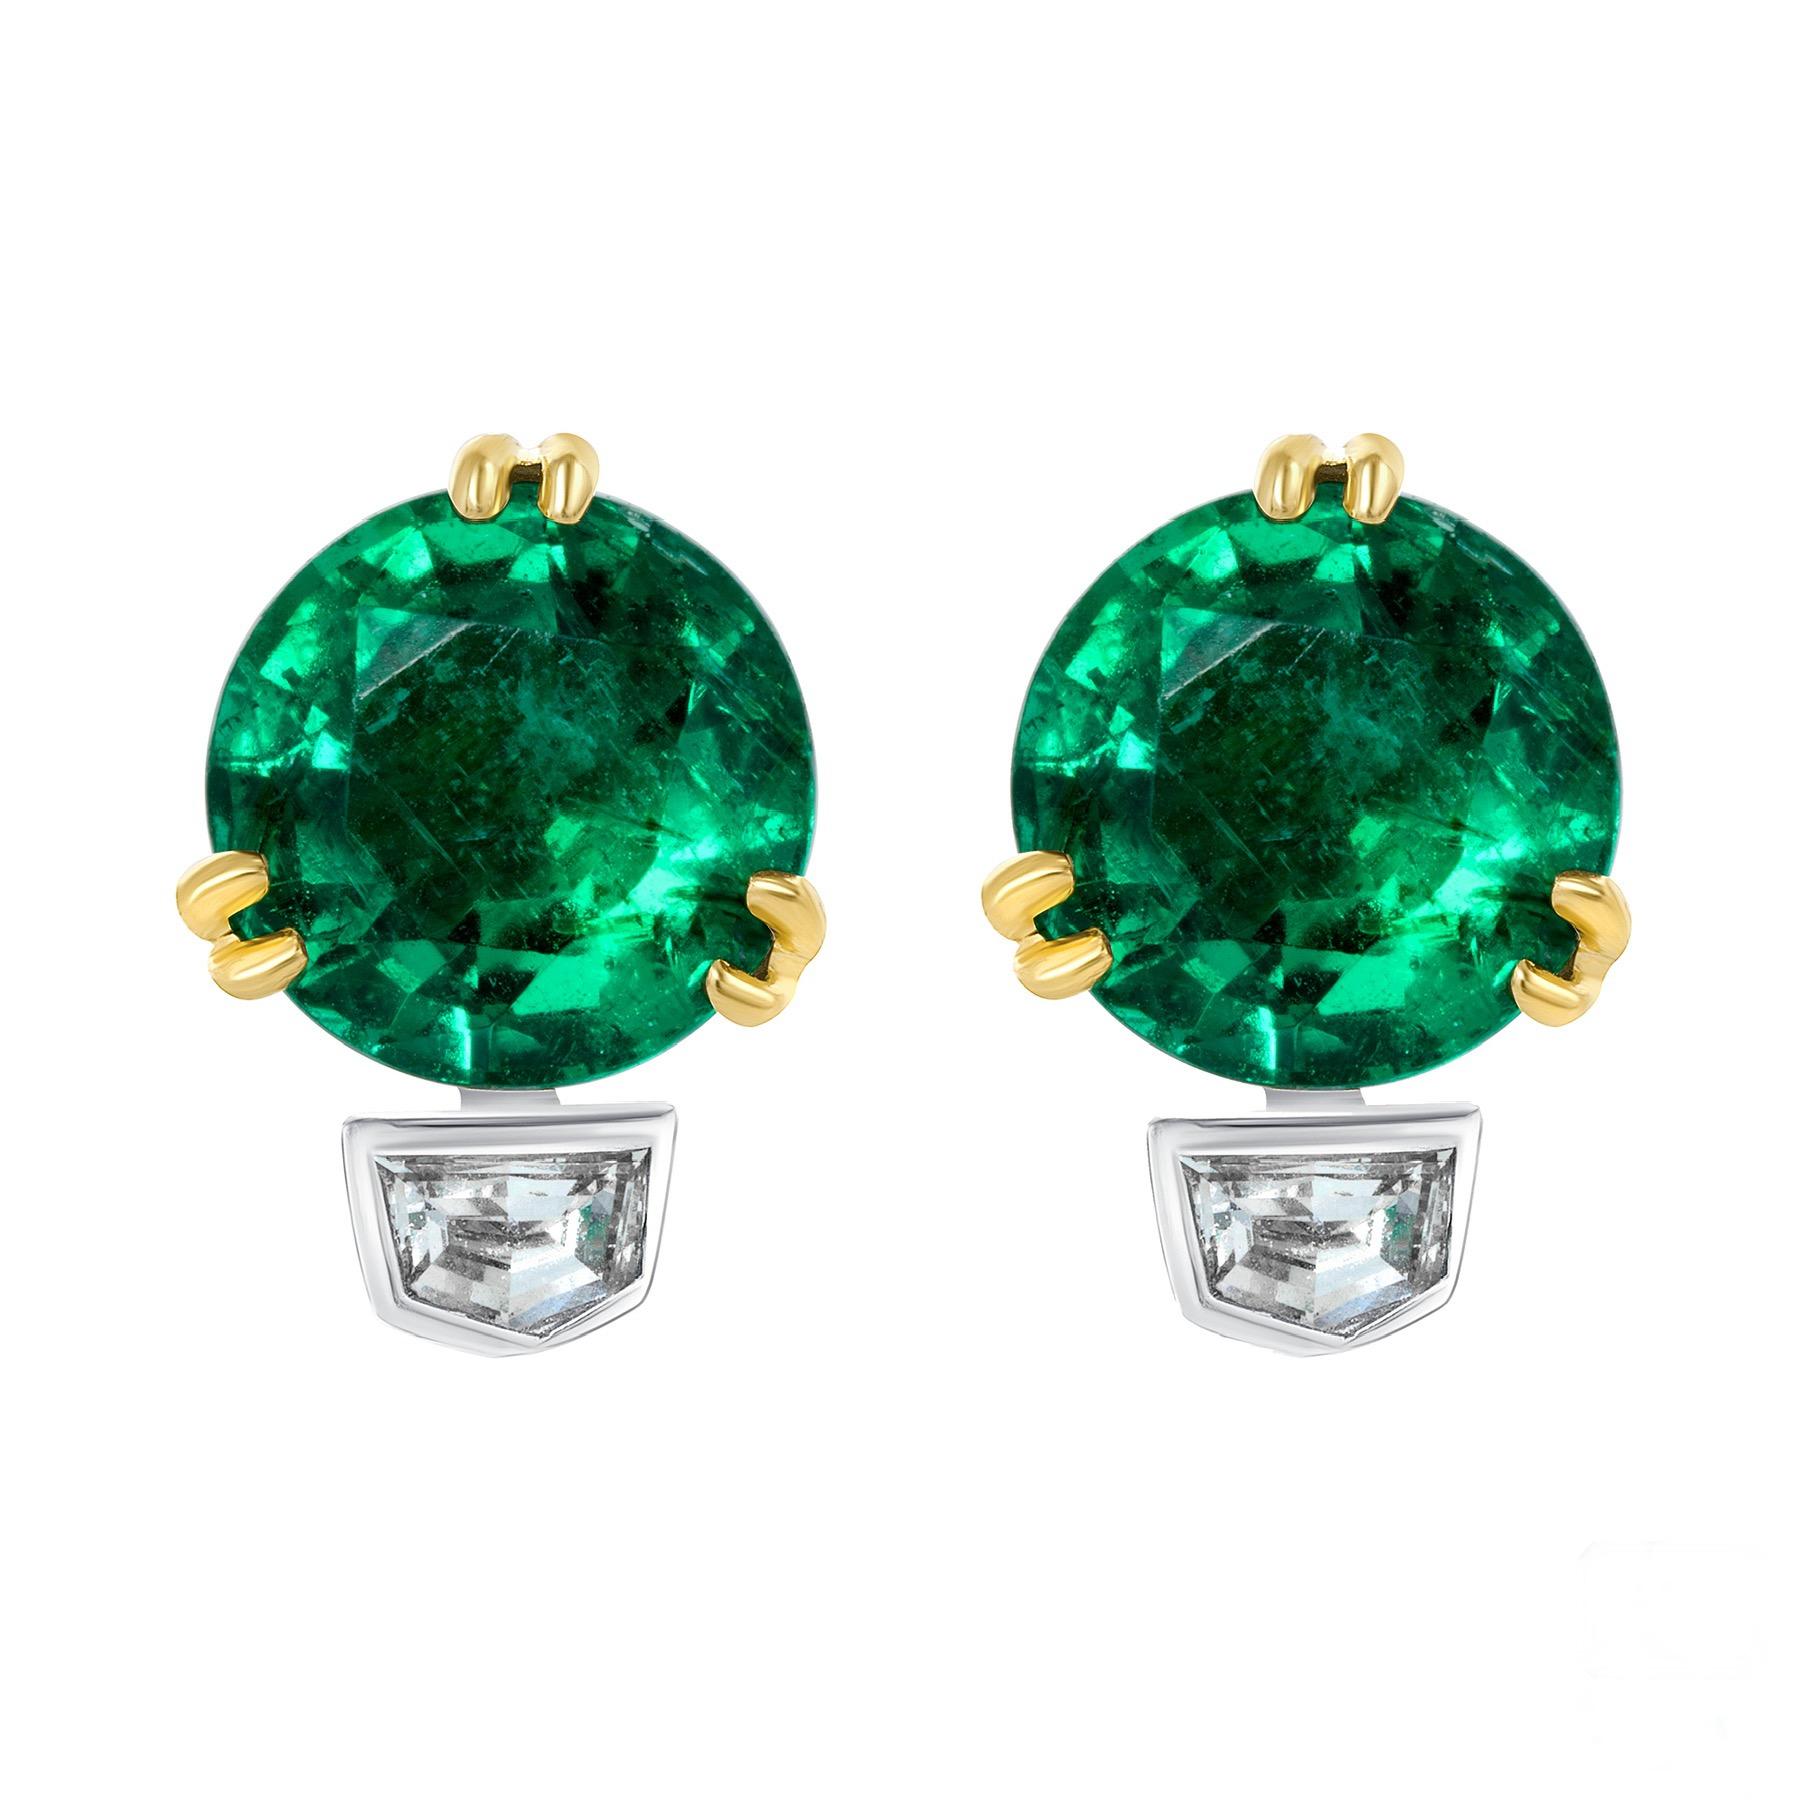 Modern 4.08ct round Emerald earrings. GIA certified. For Sale